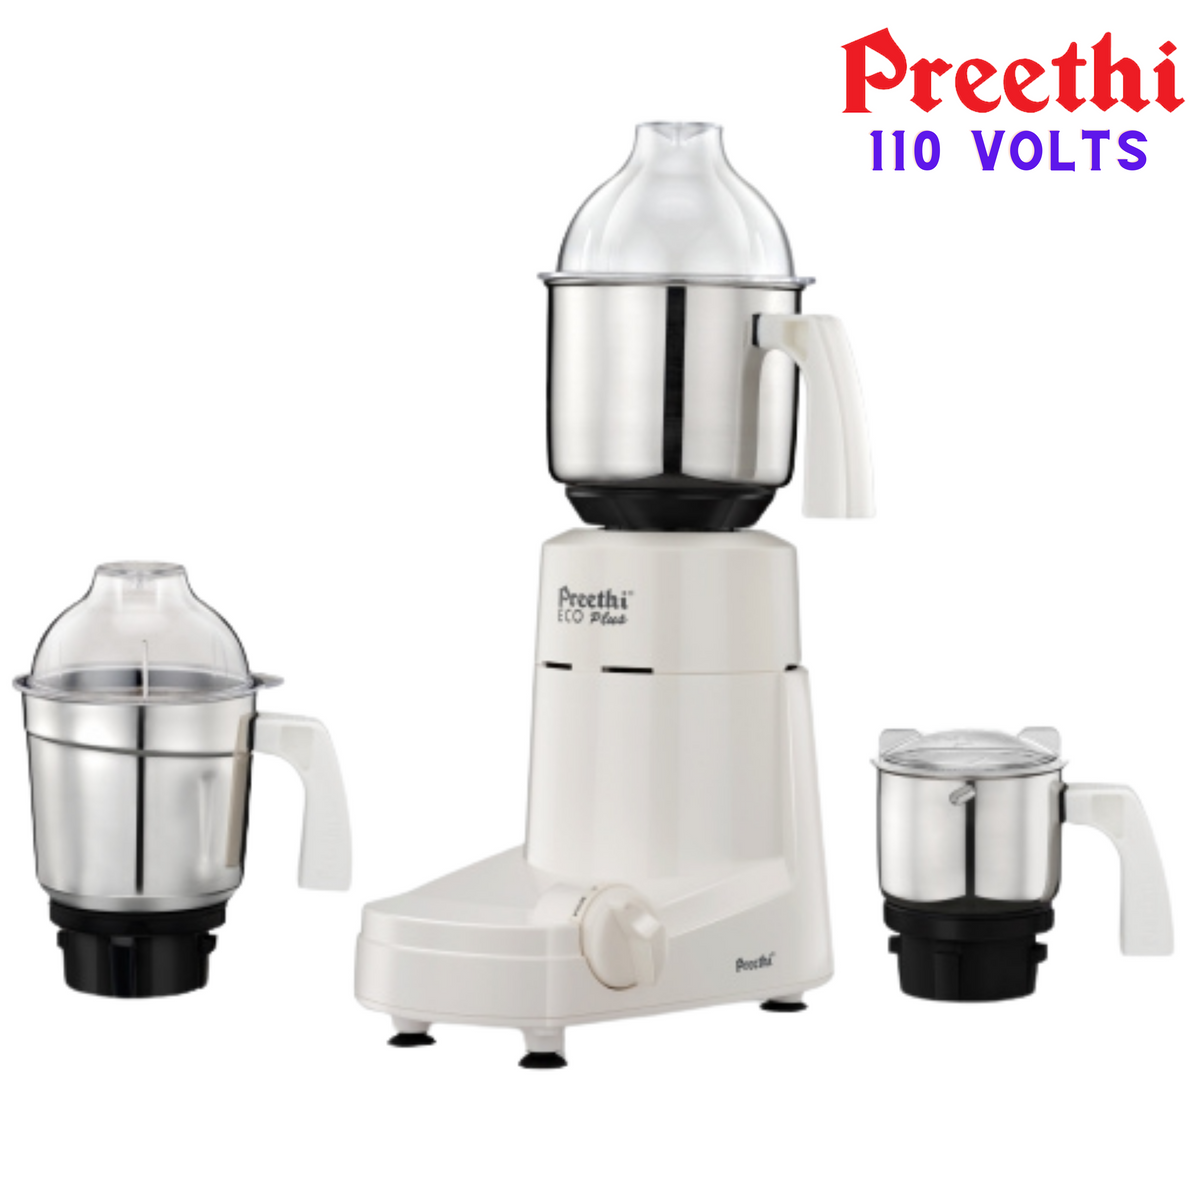 Preethi Eco Plus 110 Volts Mixer Grinder (For Use In Usa &amp; Canada Only),White